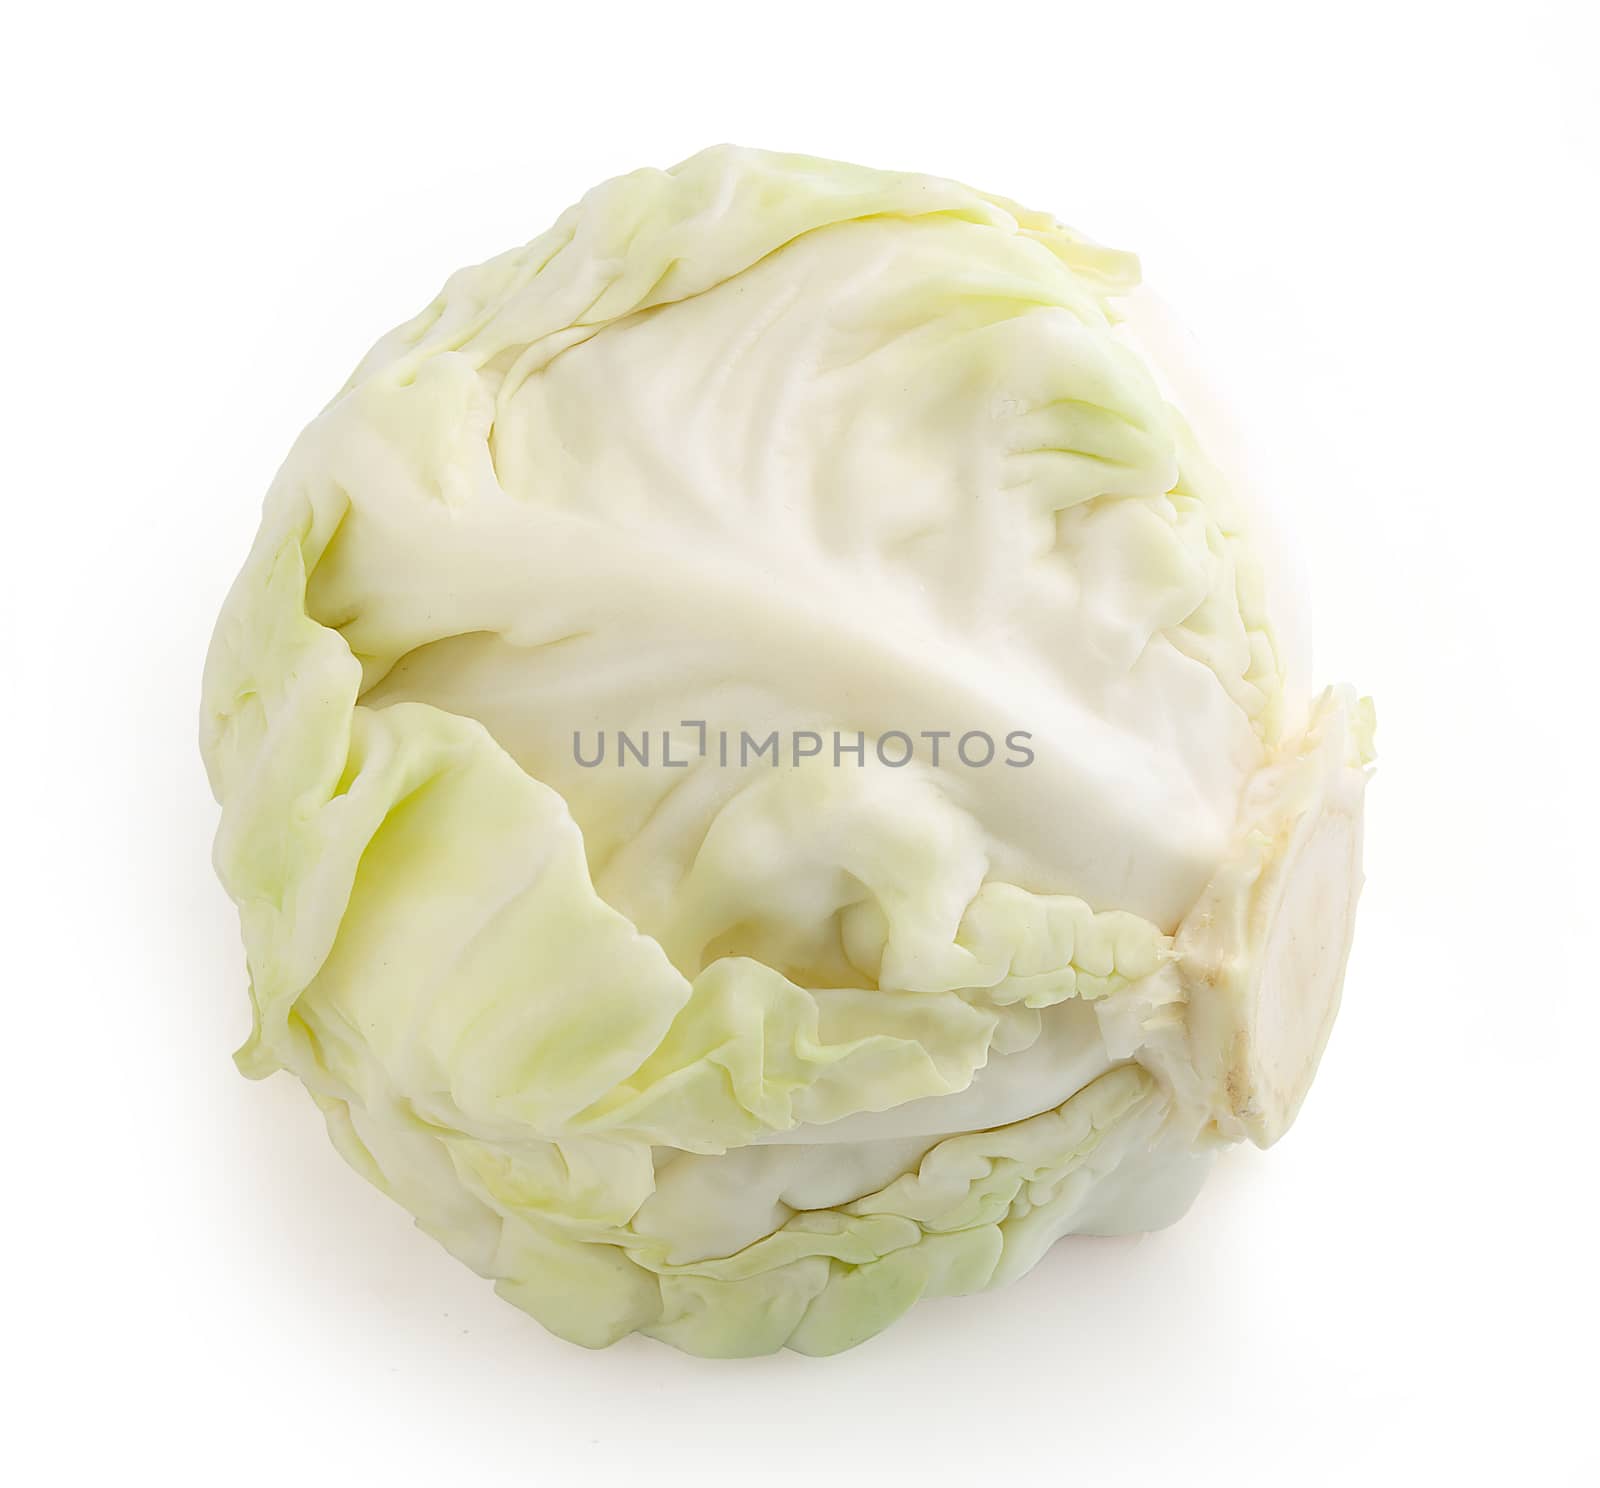 Cabbage head by Angorius